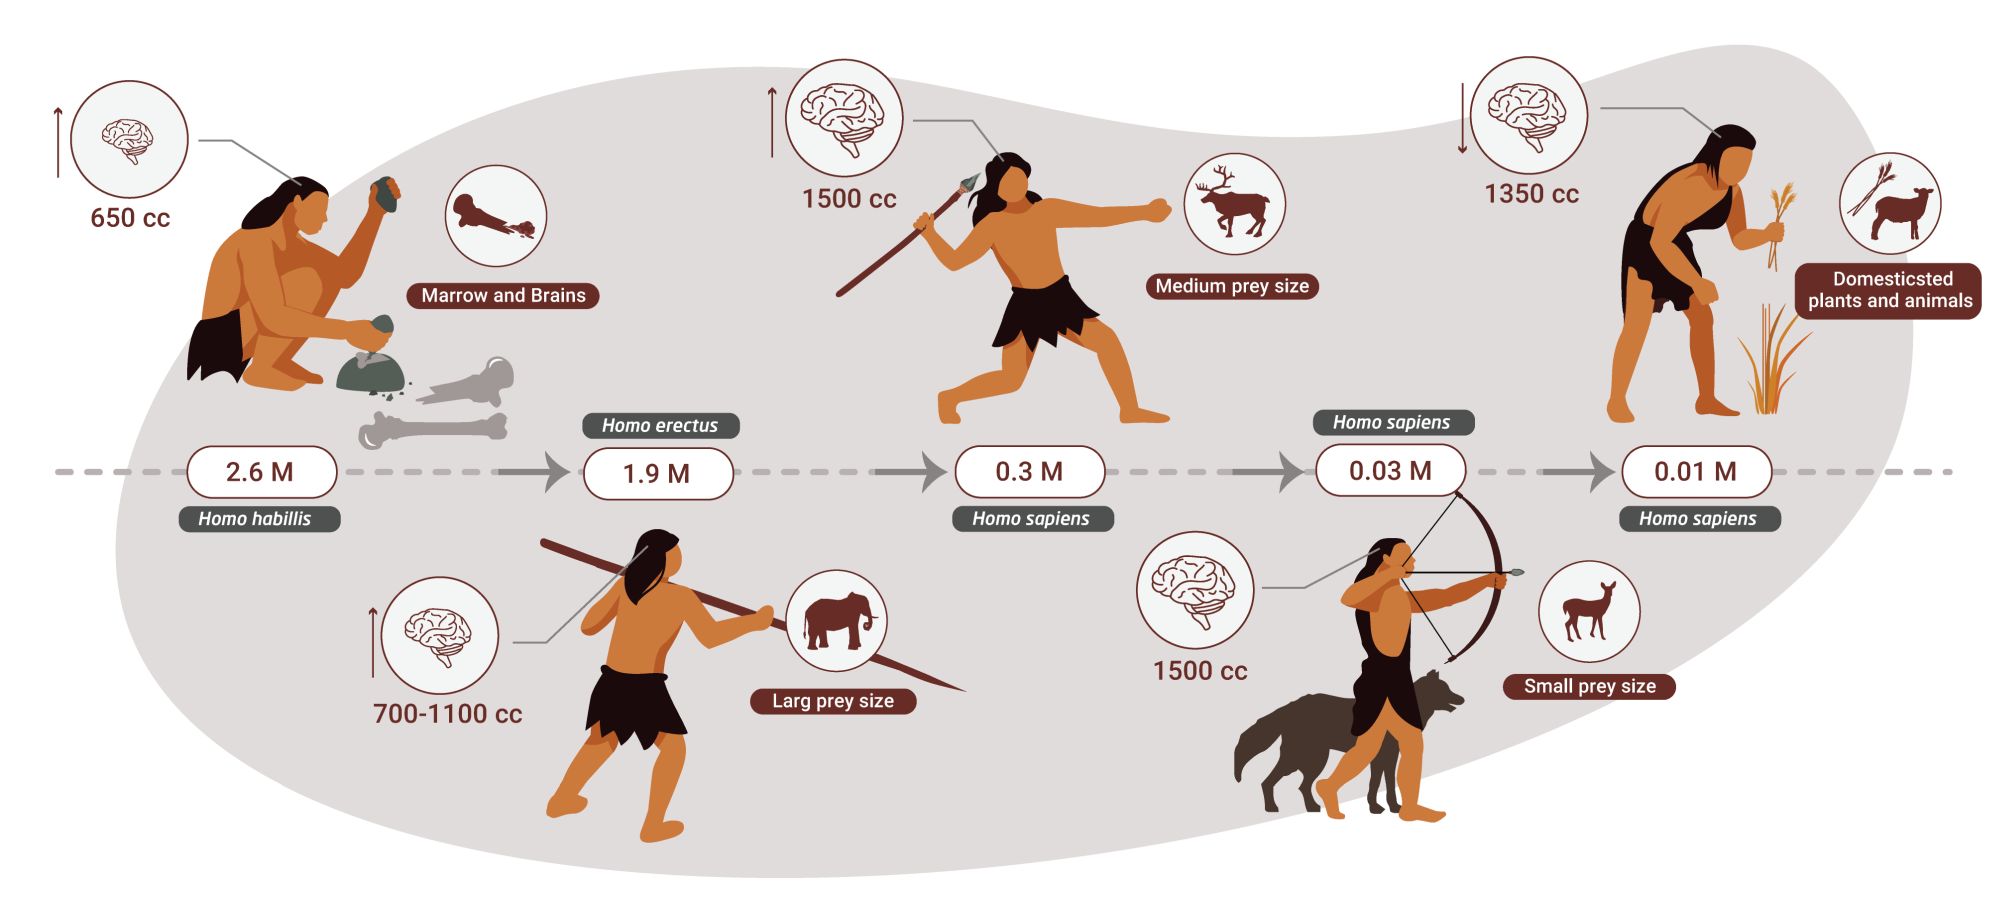 For 2 million years, humans ate meat and little else -- study | The Times  of Israel